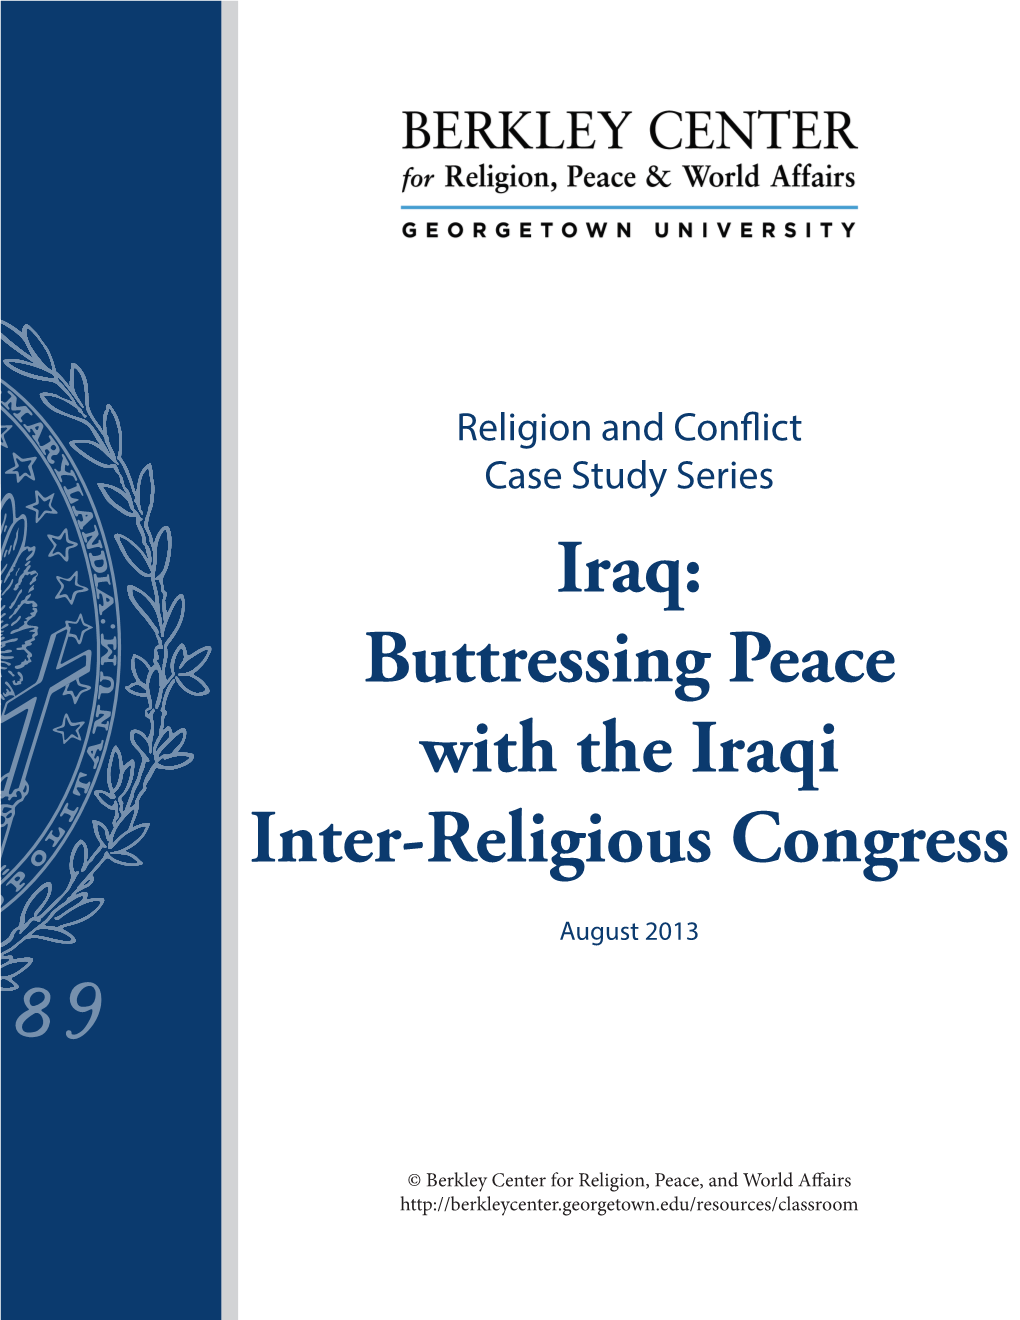 Iraq: Buttressing Peace with the Iraqi Inter-Religious Congress